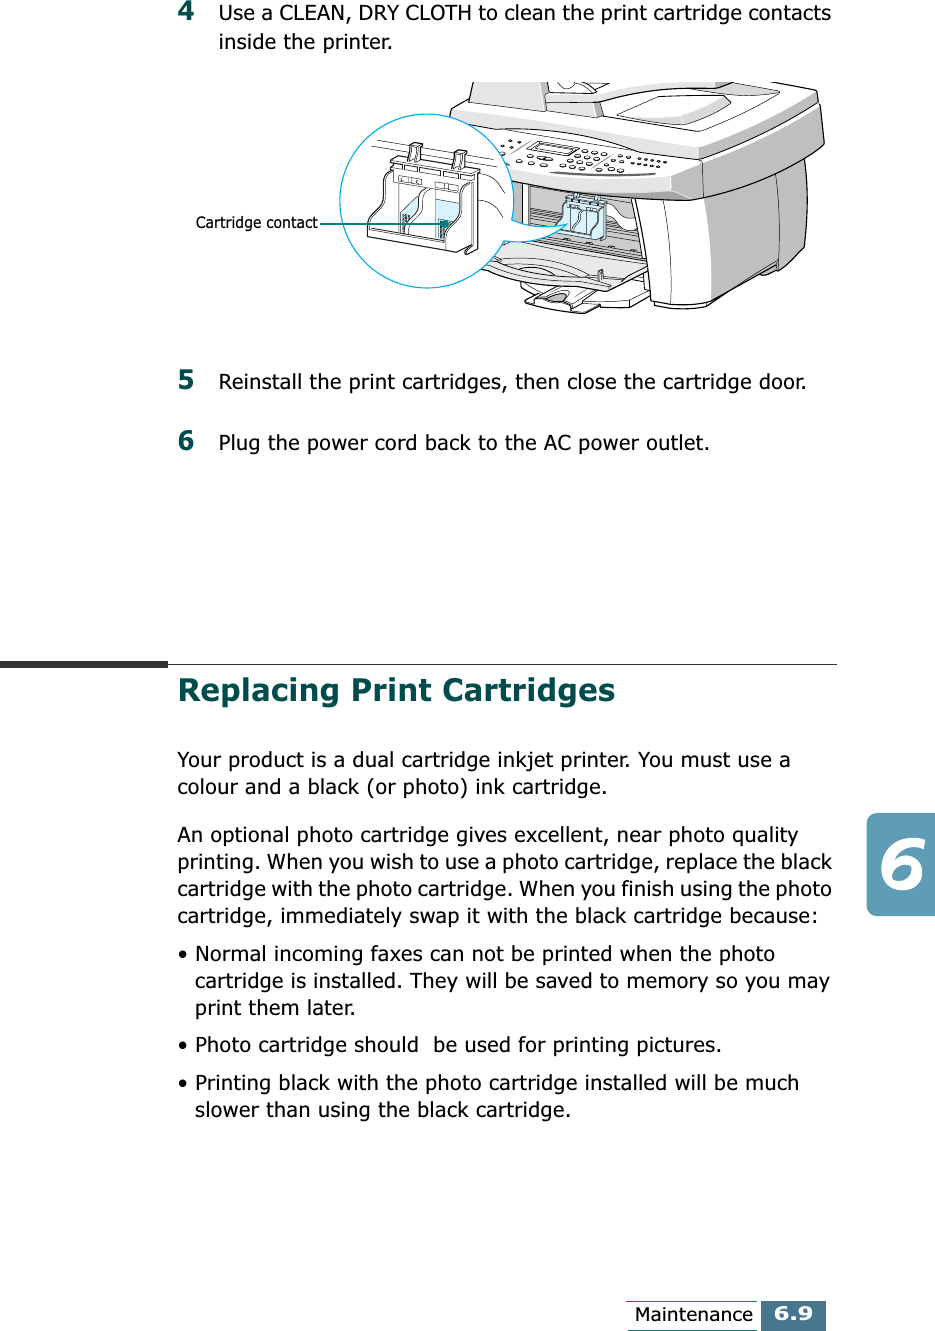 6.9Maintenance4Use a CLEAN, DRY CLOTH to clean the print cartridge contacts inside the printer.5Reinstall the print cartridges, then close the cartridge door. 6Plug the power cord back to the AC power outlet.Replacing Print CartridgesYour product is a dual cartridge inkjet printer. You must use a colour and a black (or photo) ink cartridge. An optional photo cartridge gives excellent, near photo quality printing. When you wish to use a photo cartridge, replace the black cartridge with the photo cartridge. When you finish using the photo cartridge, immediately swap it with the black cartridge because:• Normal incoming faxes can not be printed when the photo cartridge is installed. They will be saved to memory so you may print them later.• Photo cartridge should  be used for printing pictures. • Printing black with the photo cartridge installed will be much slower than using the black cartridge.Cartridge contact